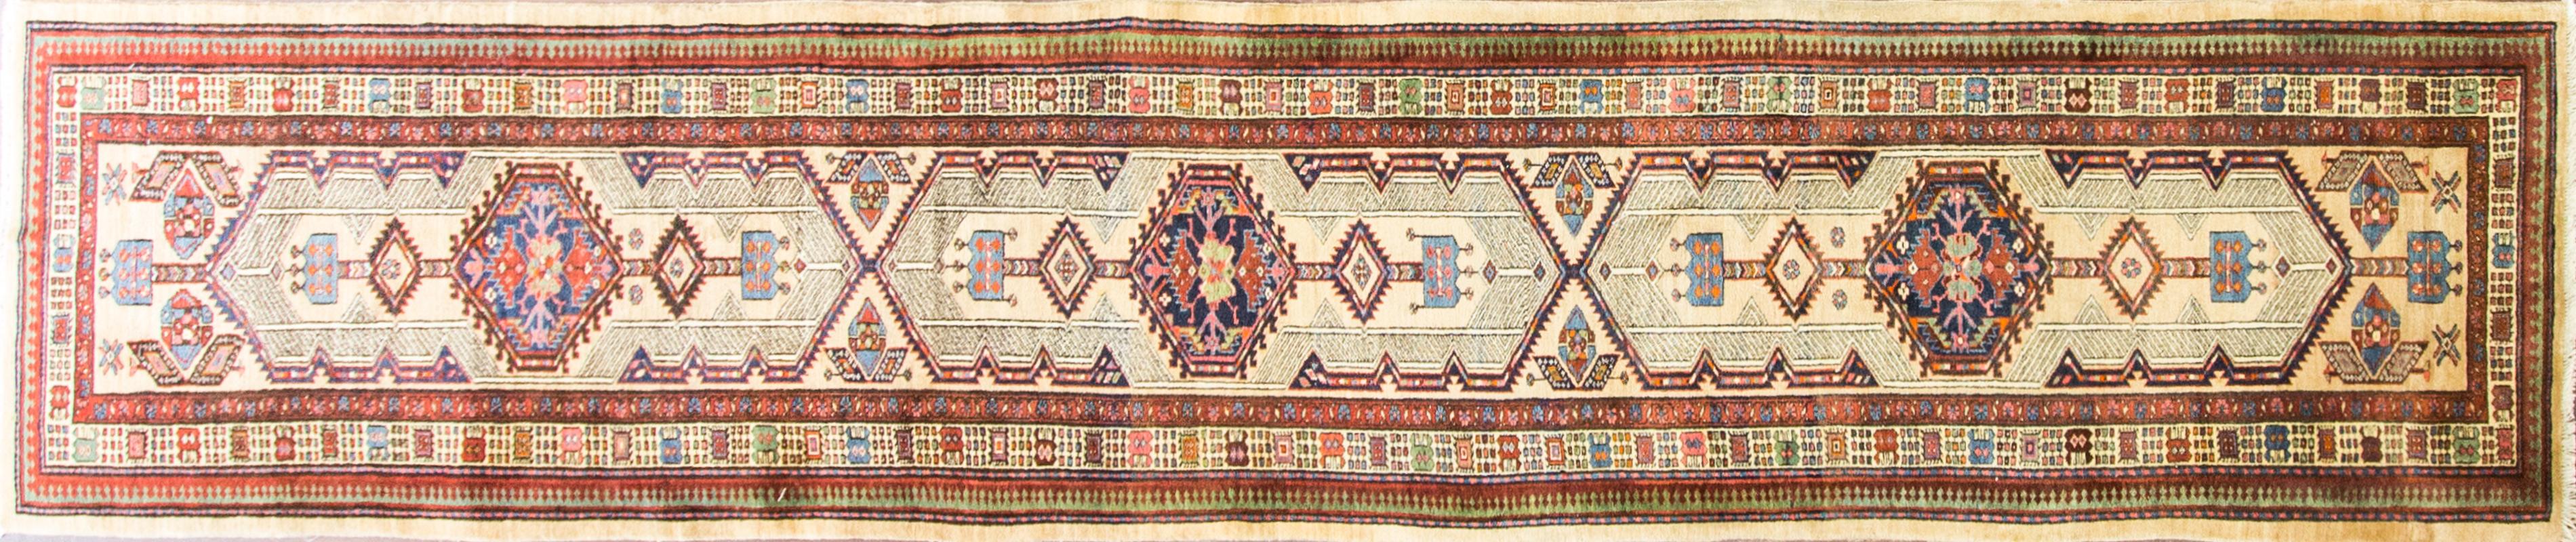 Serab, Heriz, Serapi, Bakshaish. Karaja and Serapi or Bakshaish all are villages in the district of Heriz north west Persia. Since mid-19th century rugs from these area imported to US and European market. This Karaja rug like many other antique rugs